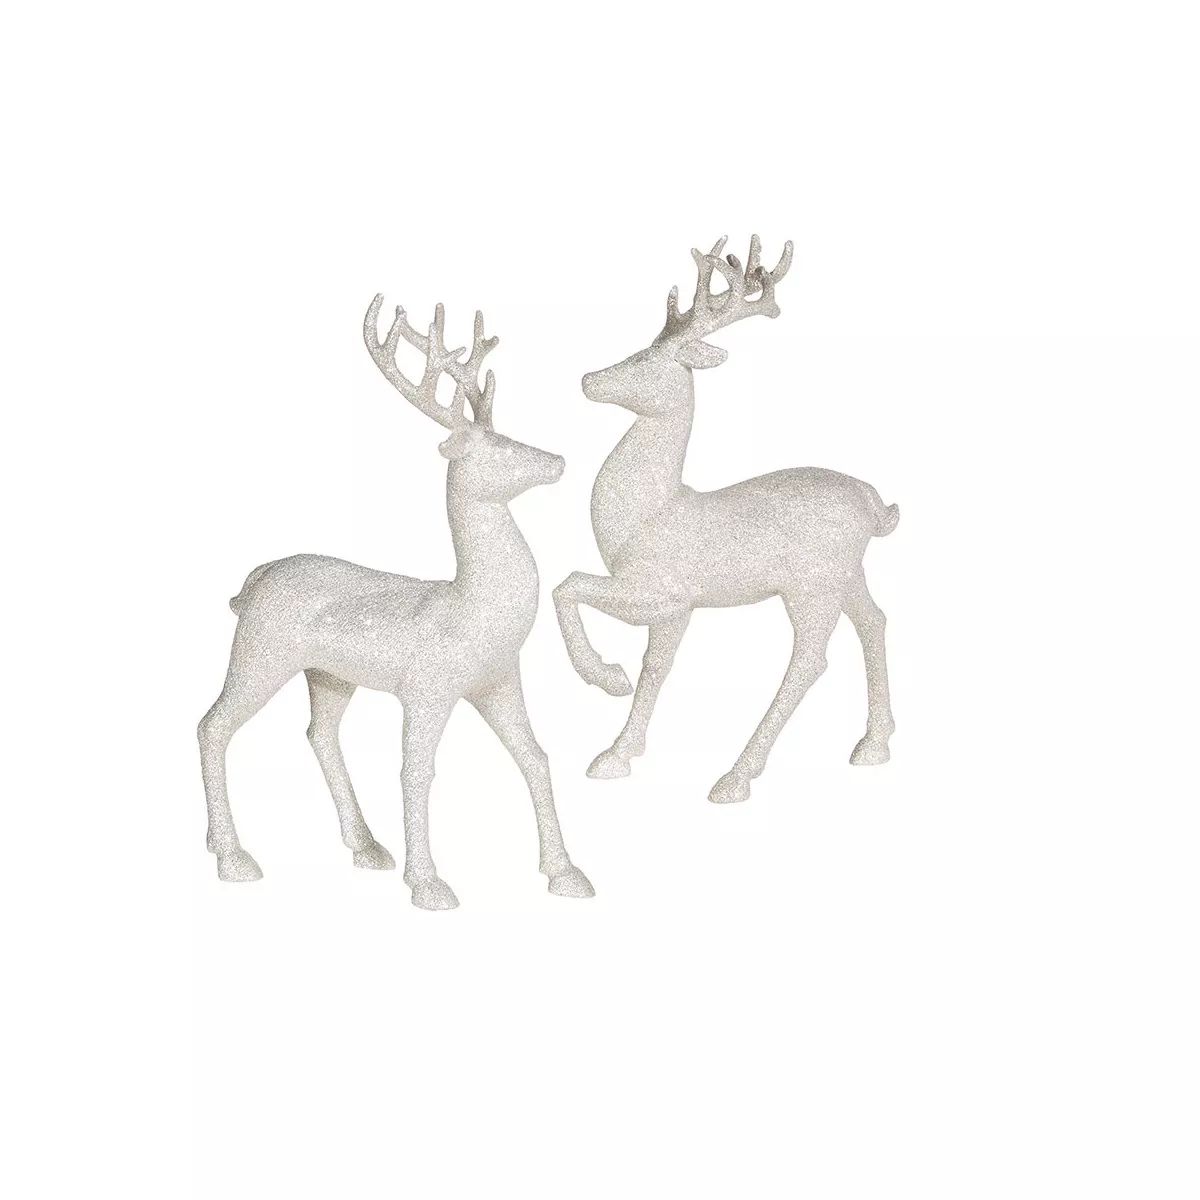 Raz Imports 12.75" Frosted White Glitter Standing Reindeer Christmas Figure | Target